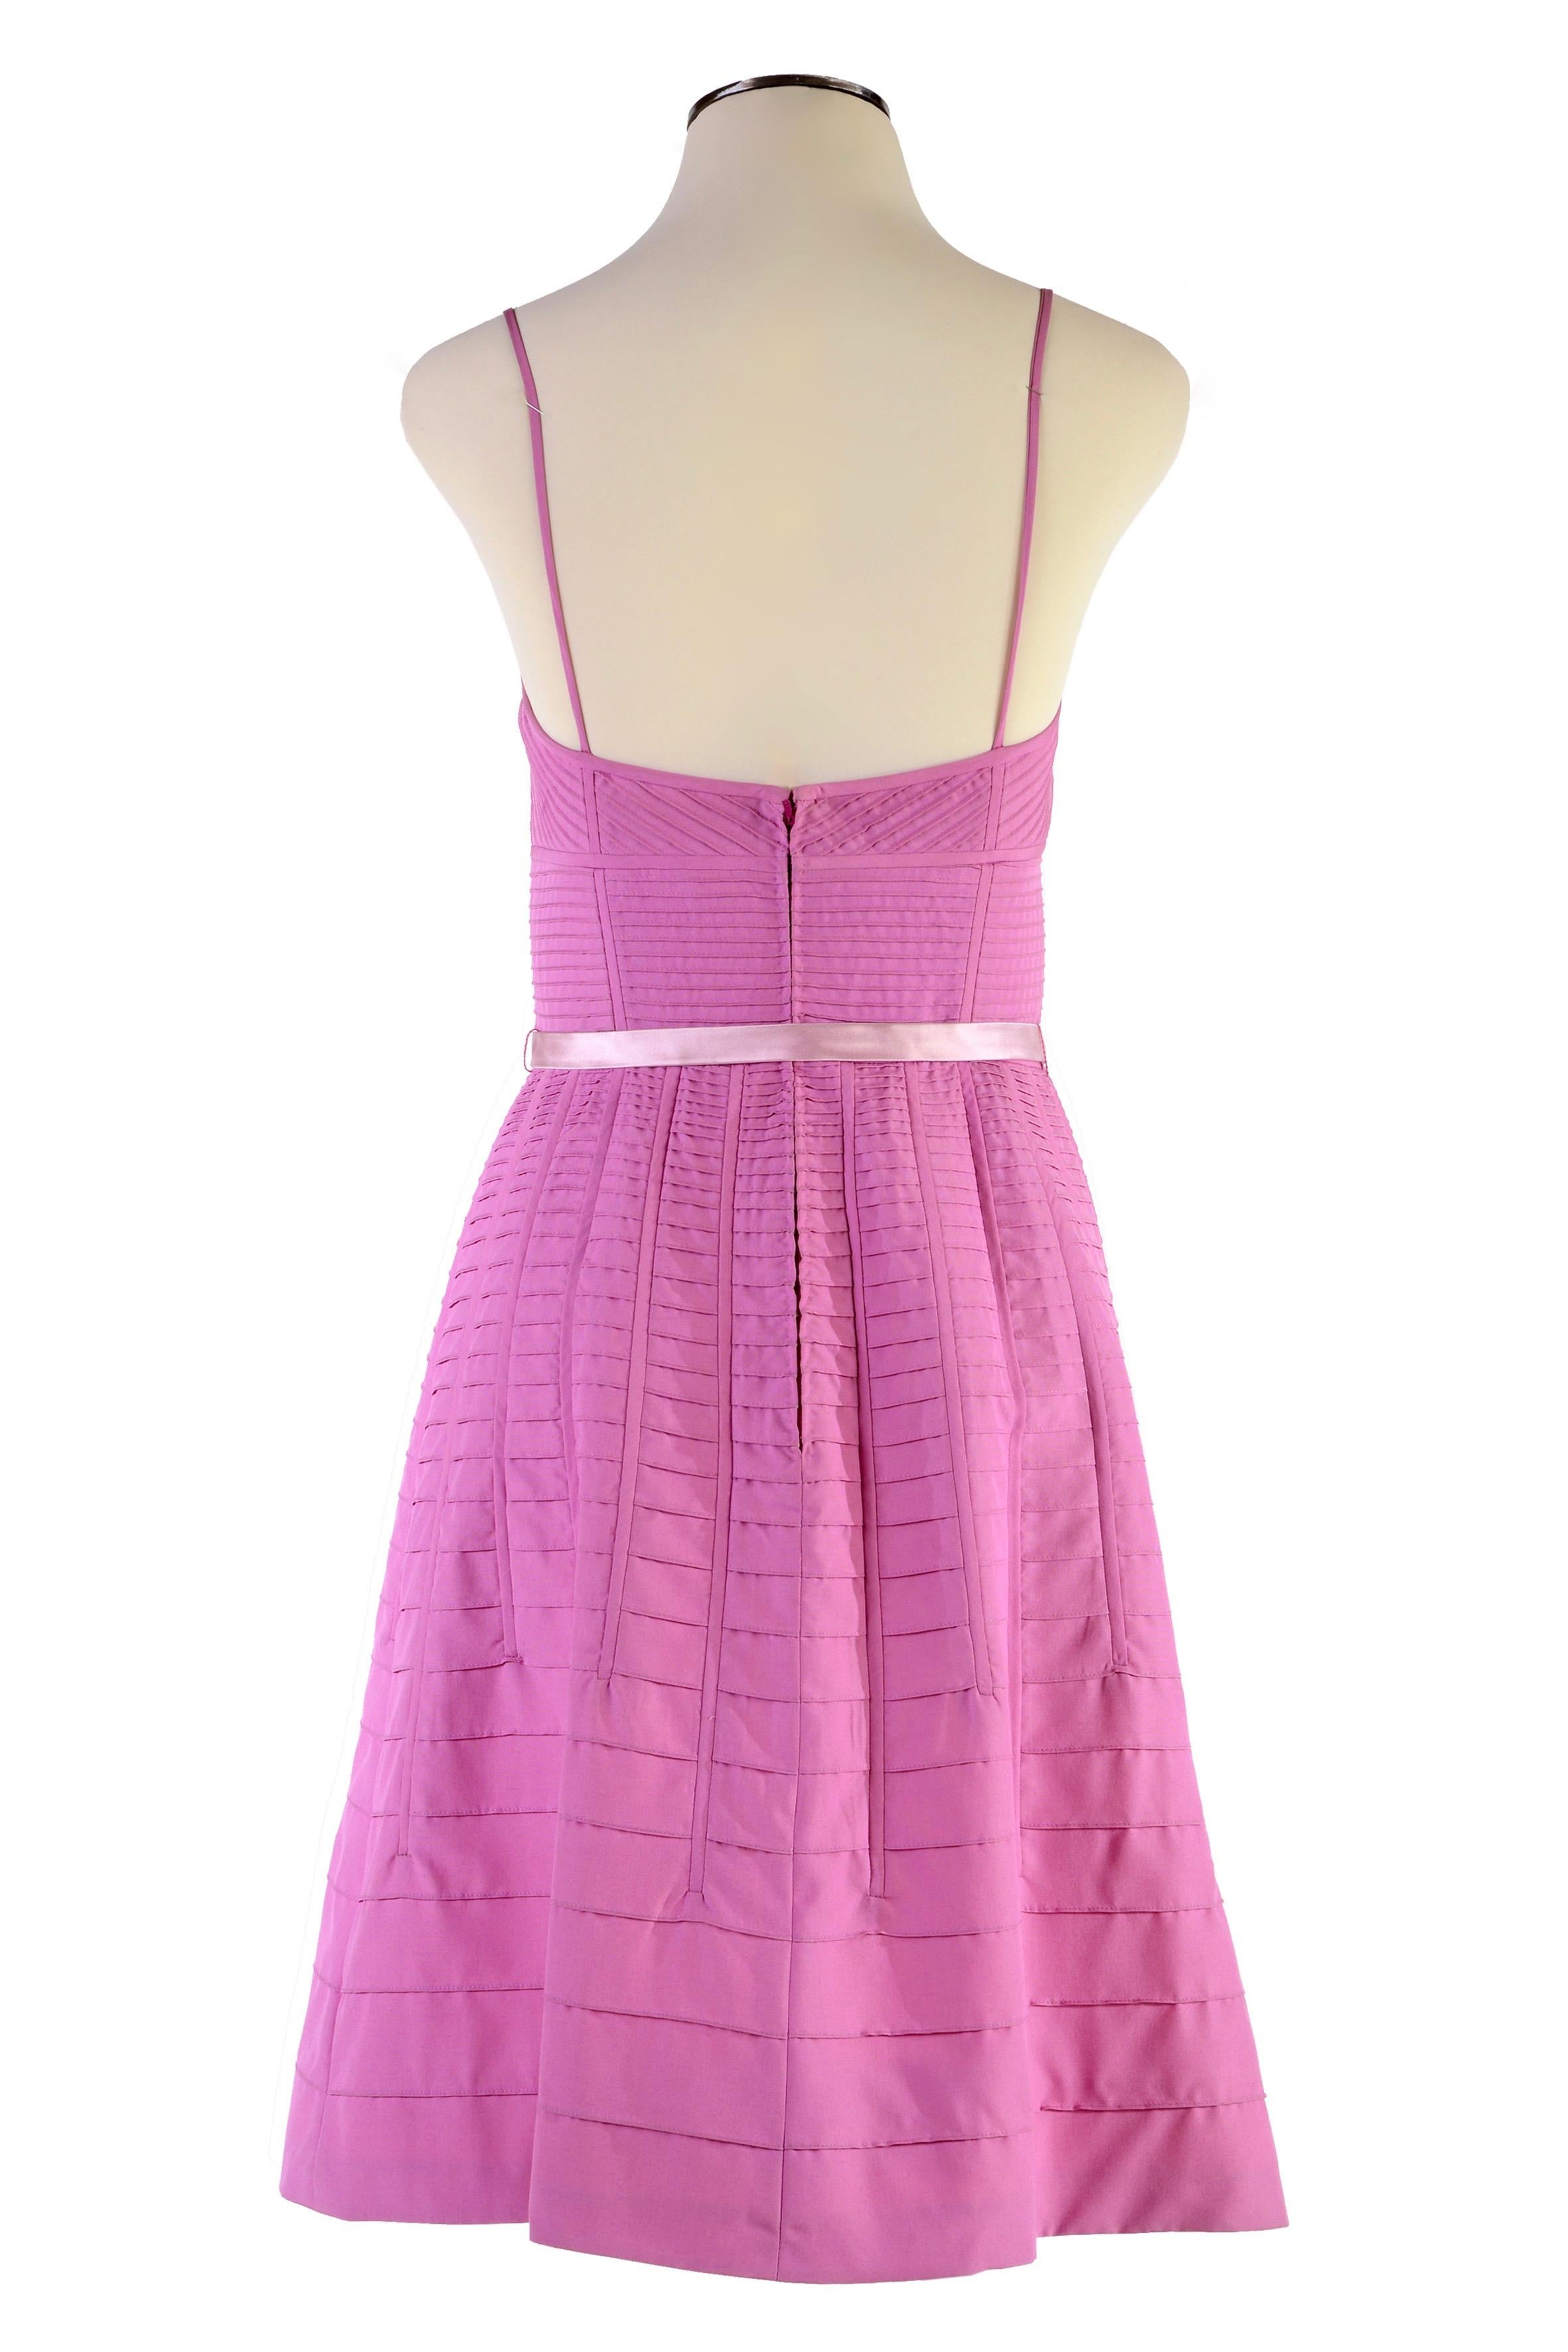 Marc Jacobs pink dress US 6 In Excellent Condition For Sale In Rubiera, RE